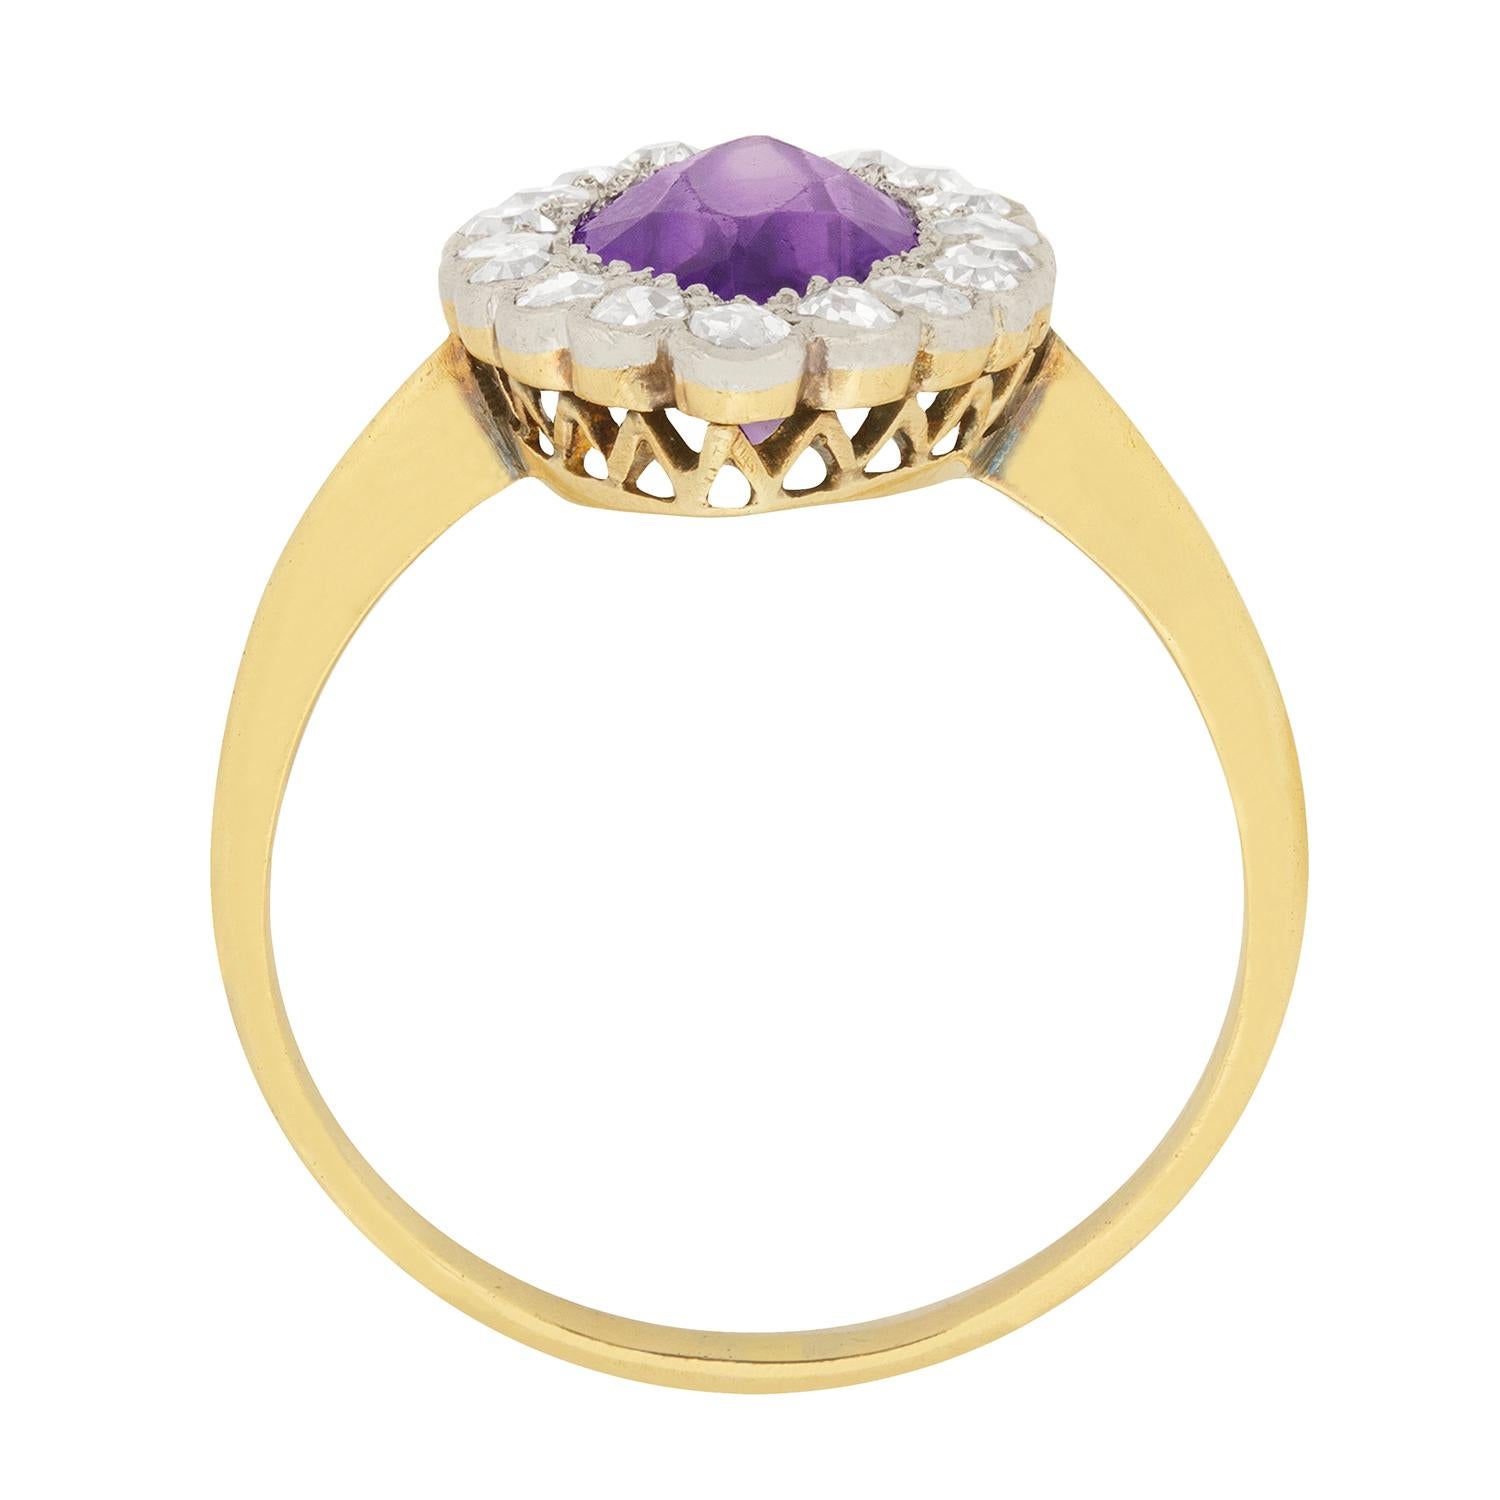 A halo of twinkling old cut diamonds framed in platinum encircles the rich, beautiful 1.50 carat amethyst in its 18 carat yellow gold openwork setting at the centre of this classic 1920s era marquise-shaped ring.

Gemstone: Amethyst
Carat Weight: